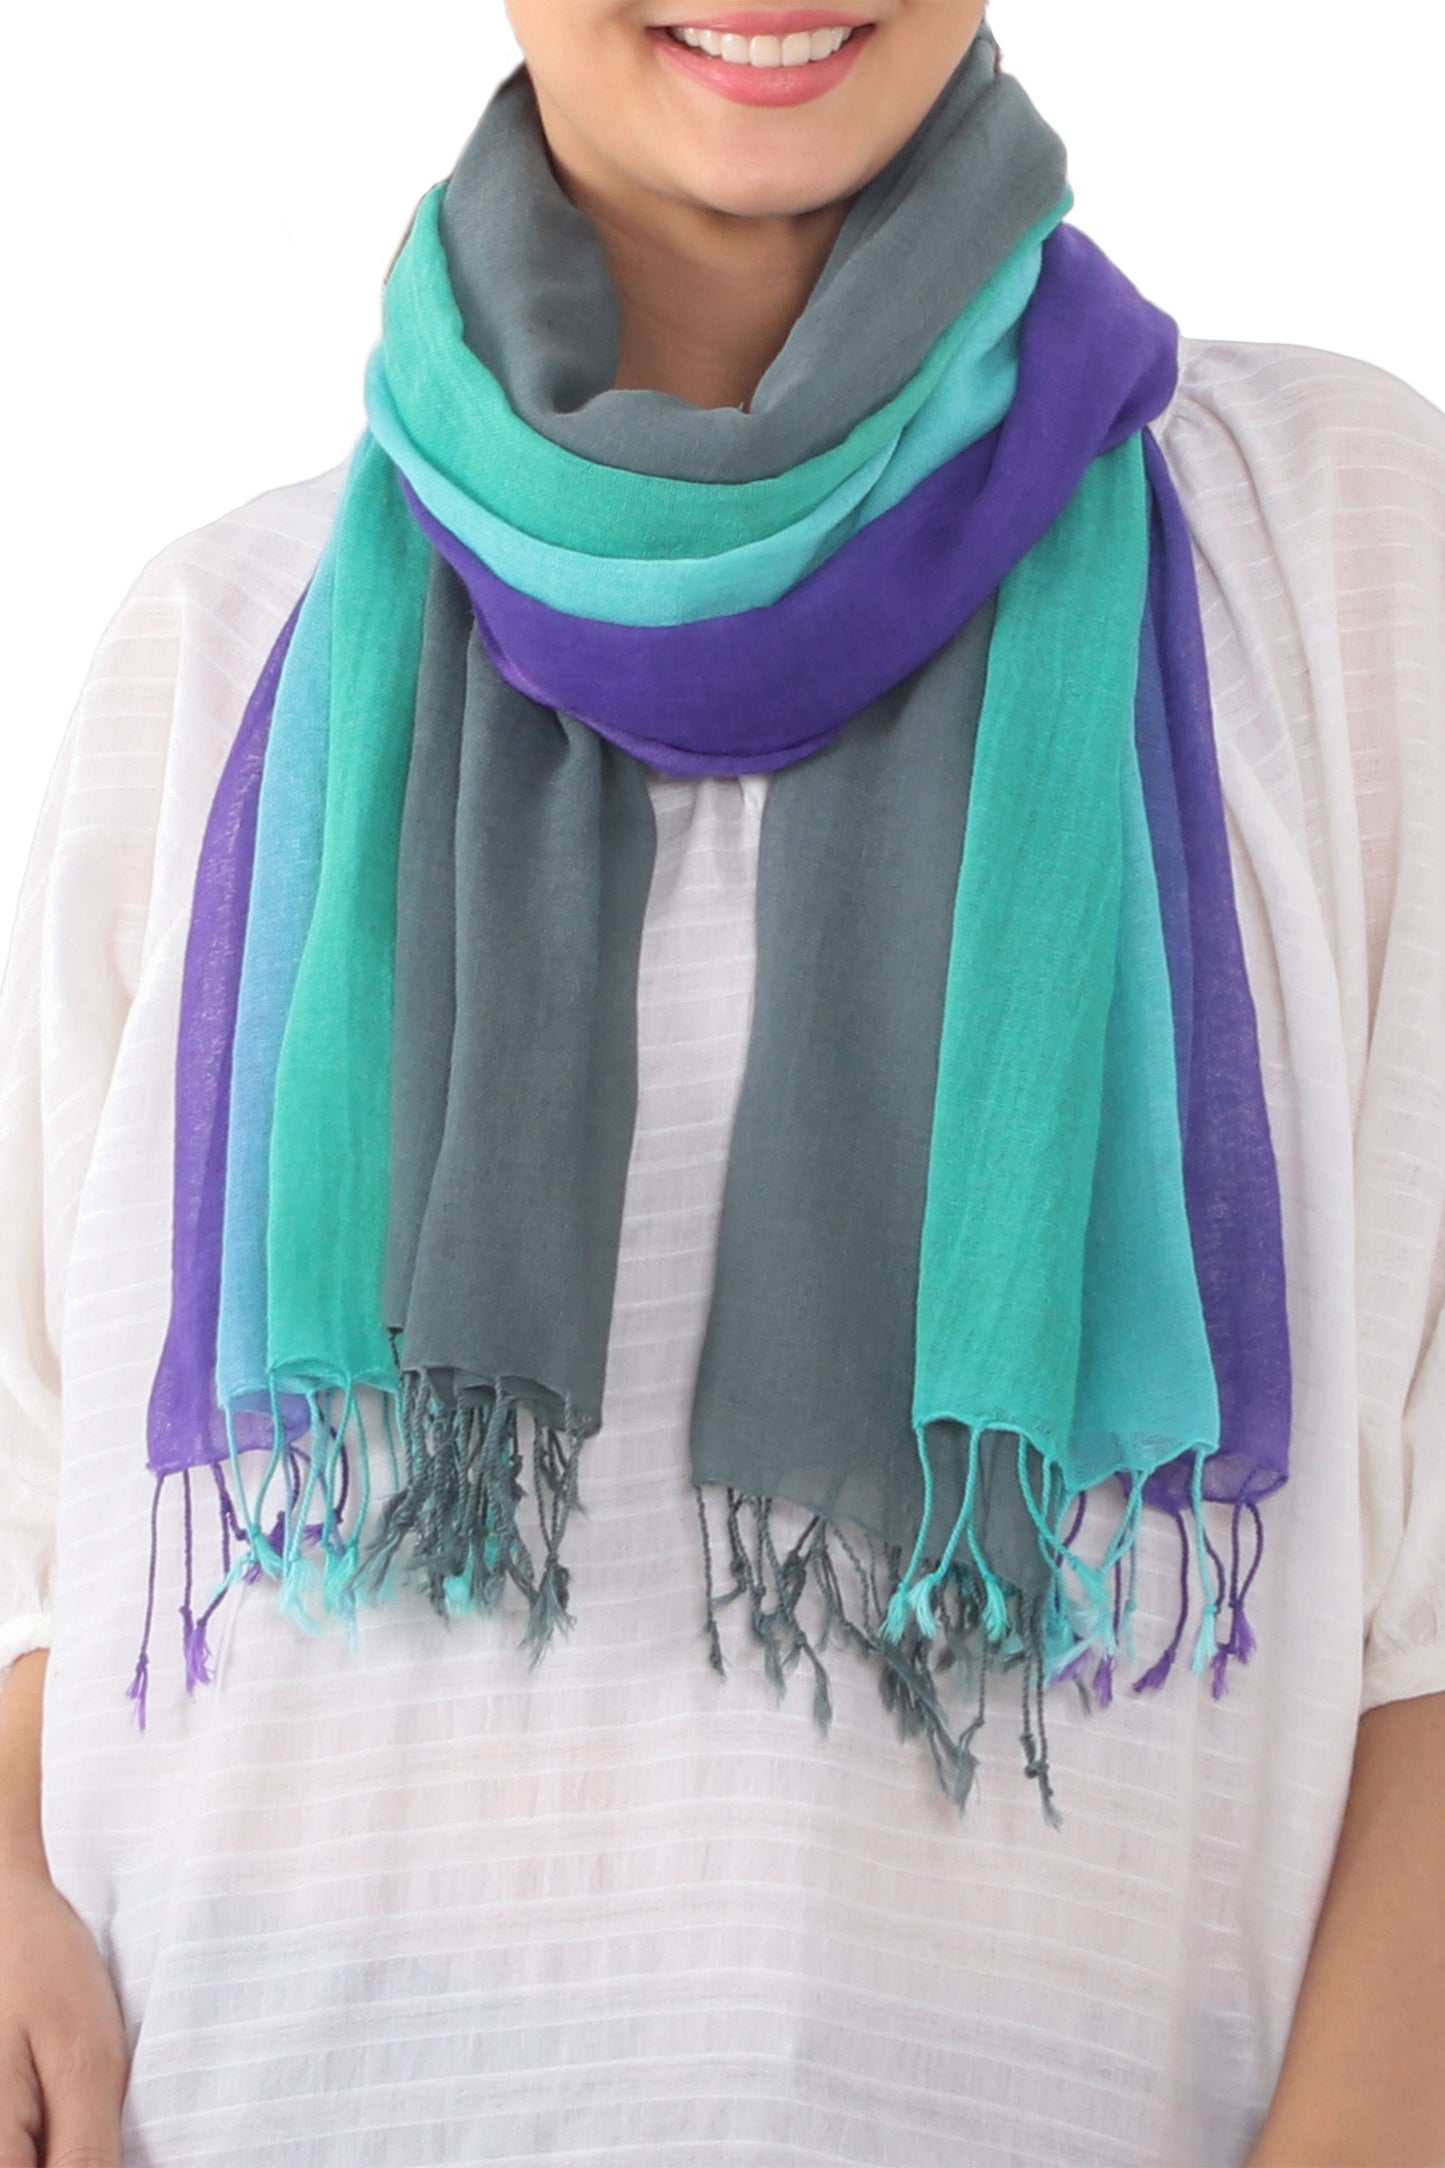 Meadow Breeze Fringed Striped Cotton Wrap Scarves from Thailand (Pair)